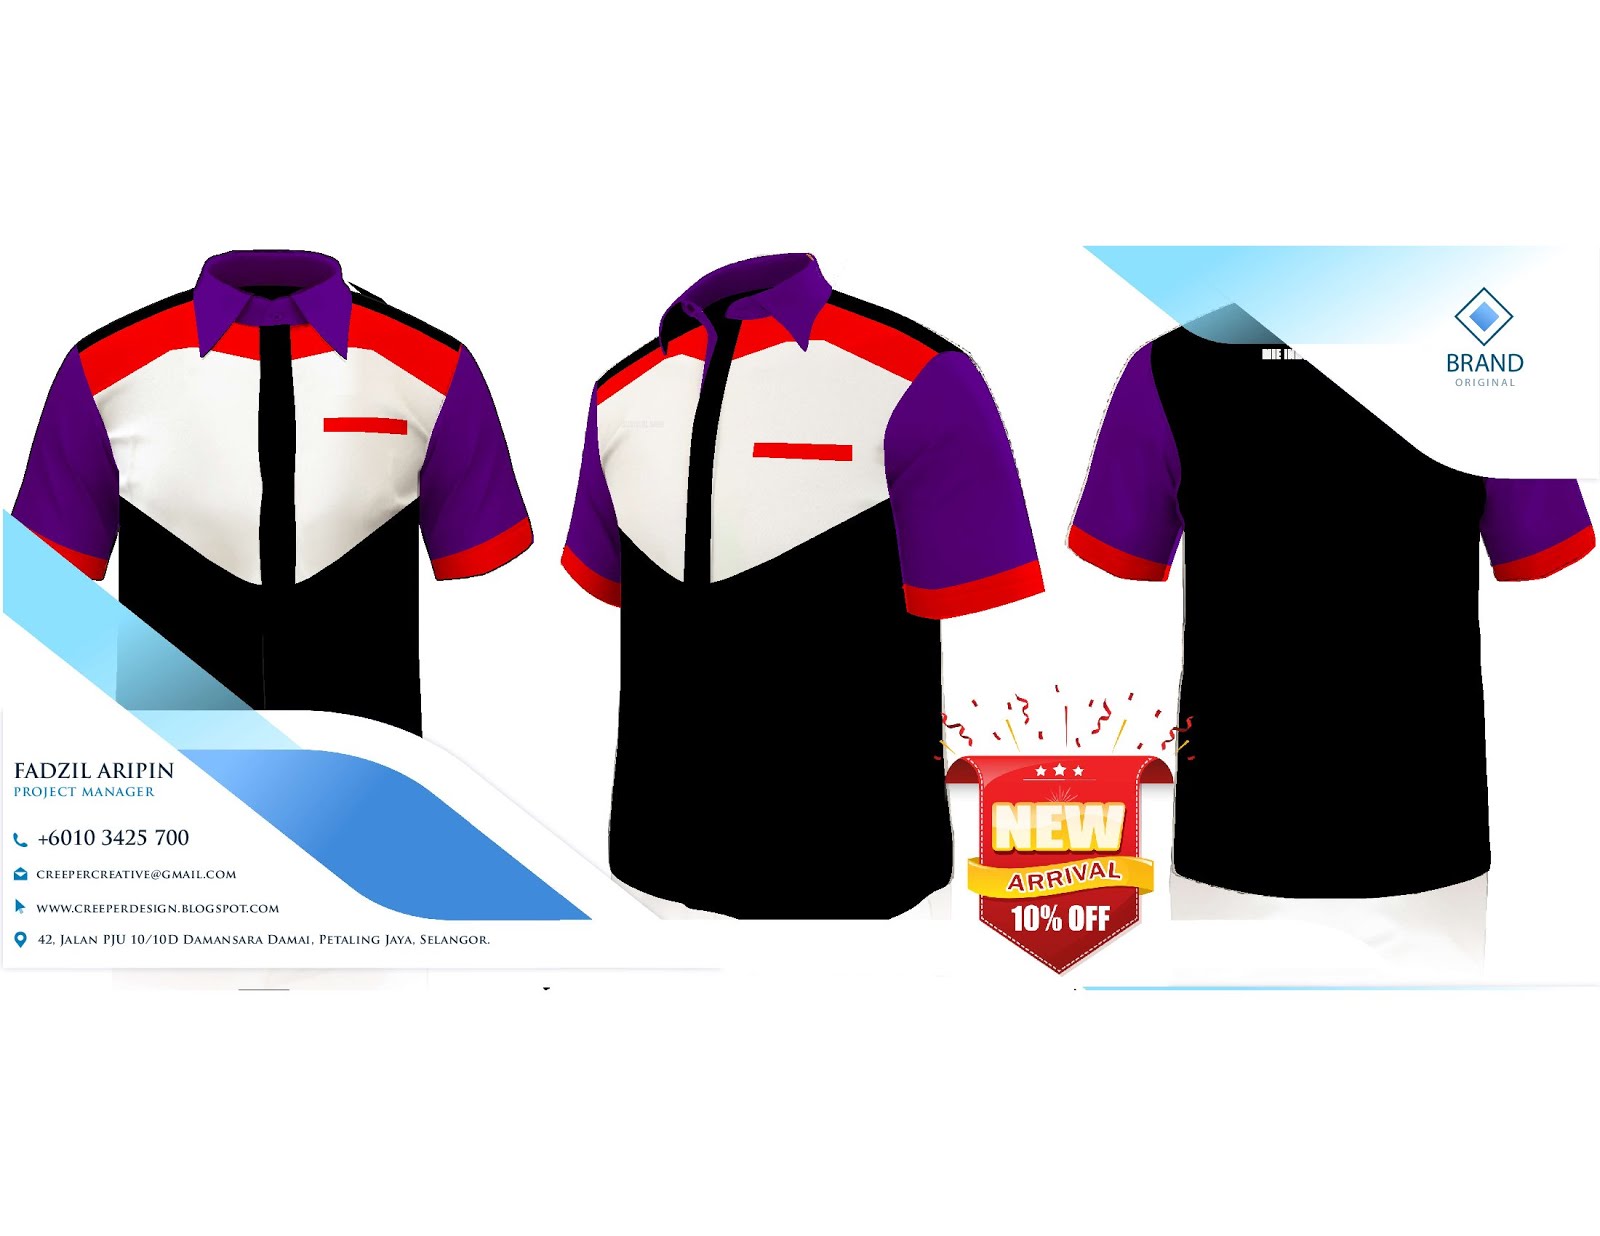 Embroidered Shirts Uniforms - Branded Shirts Offer